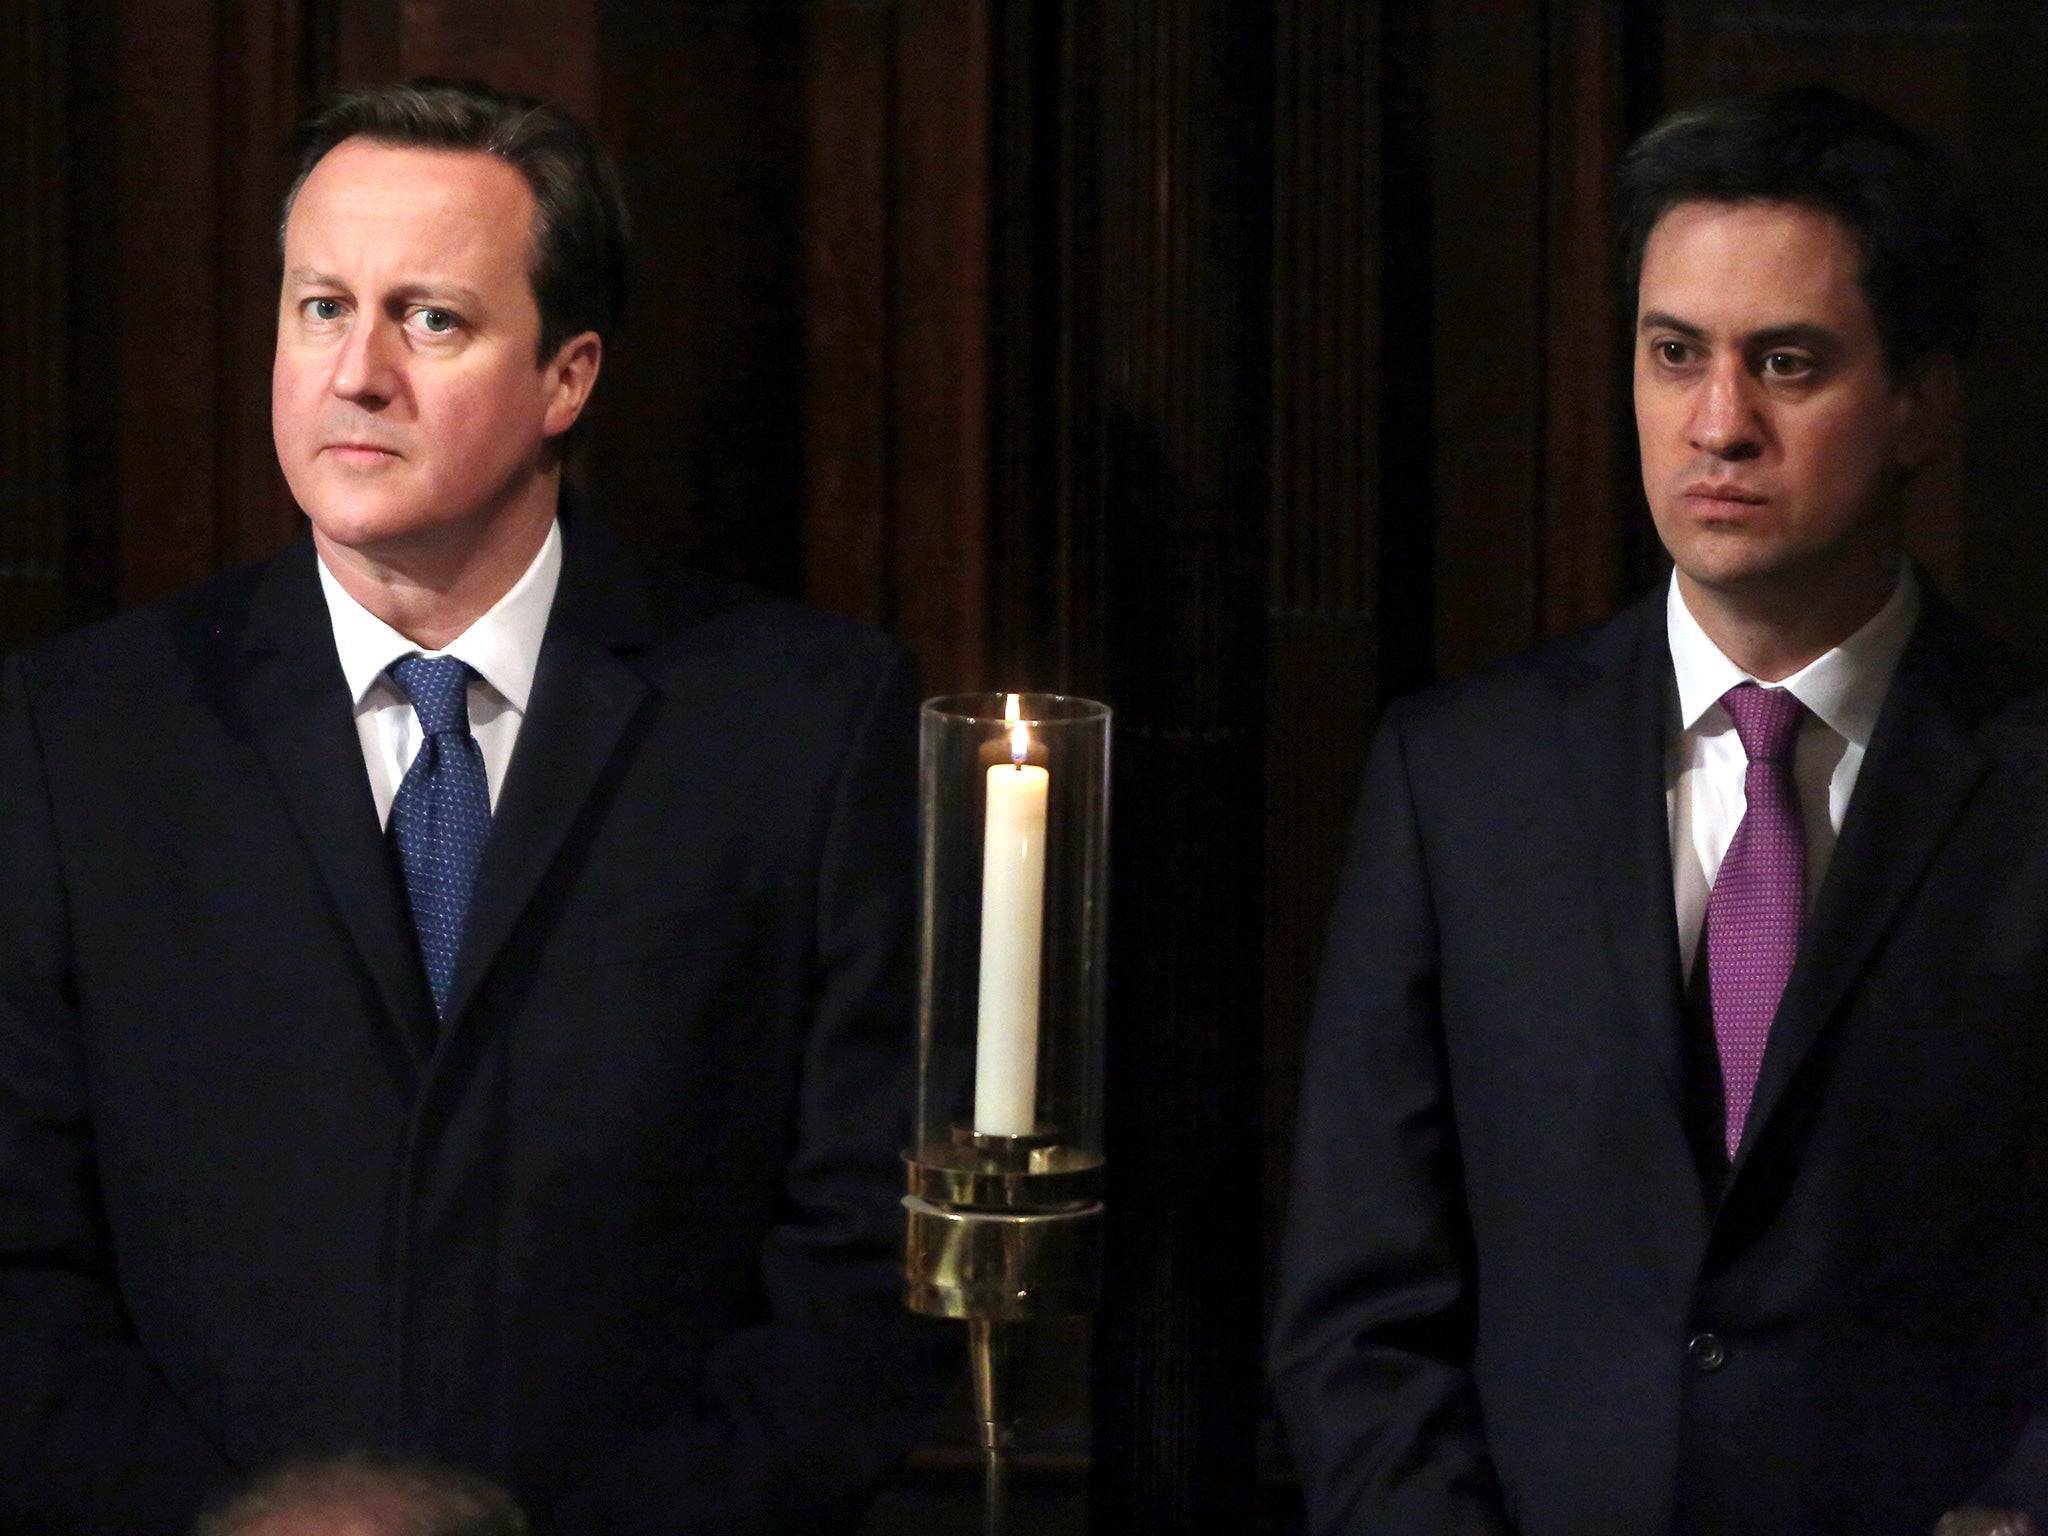 David Cameron and Ed Miliband's parties are neck and neck in the polls